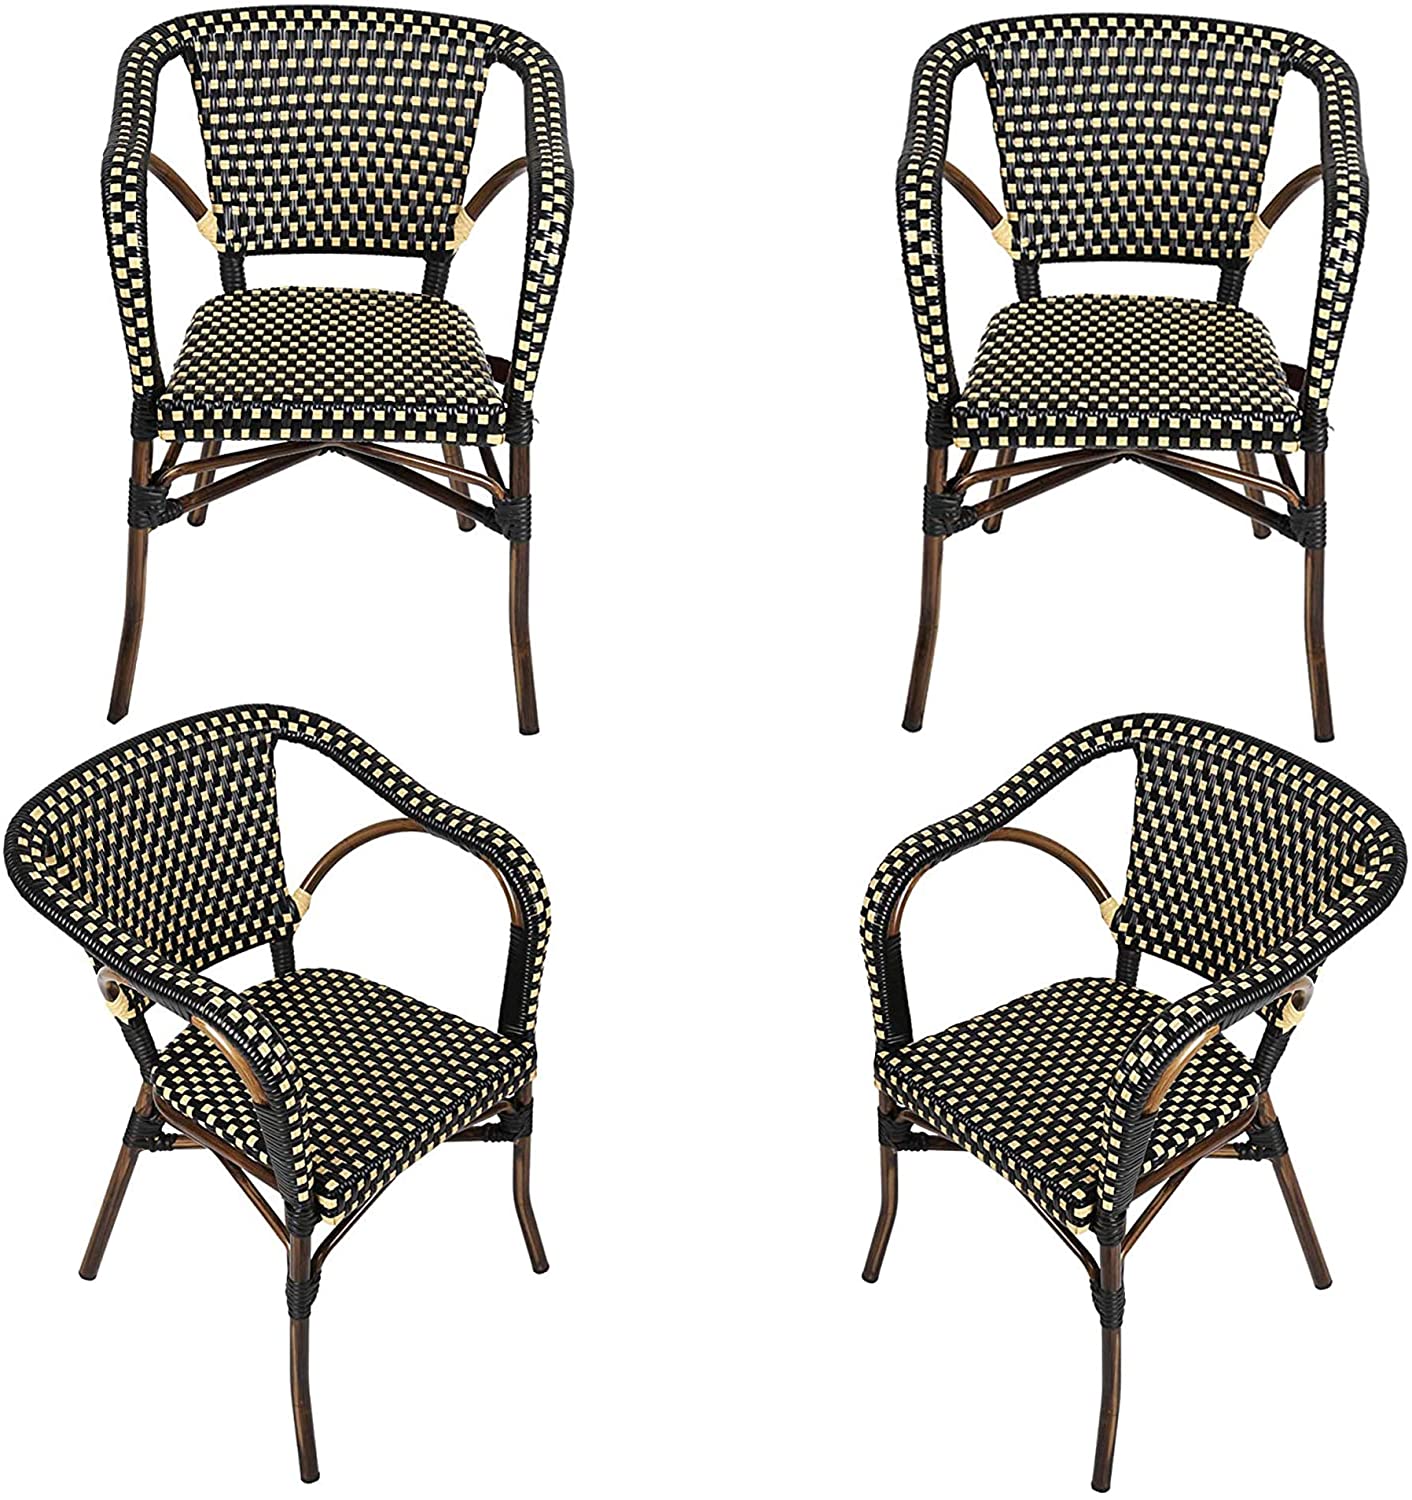 Outdoor Rattan Wicker Chair Set of 4 Stackable Arm Chairs with Aluminum Frame Patio Dining Chair for Backyard Porch Garden, Black/Cream